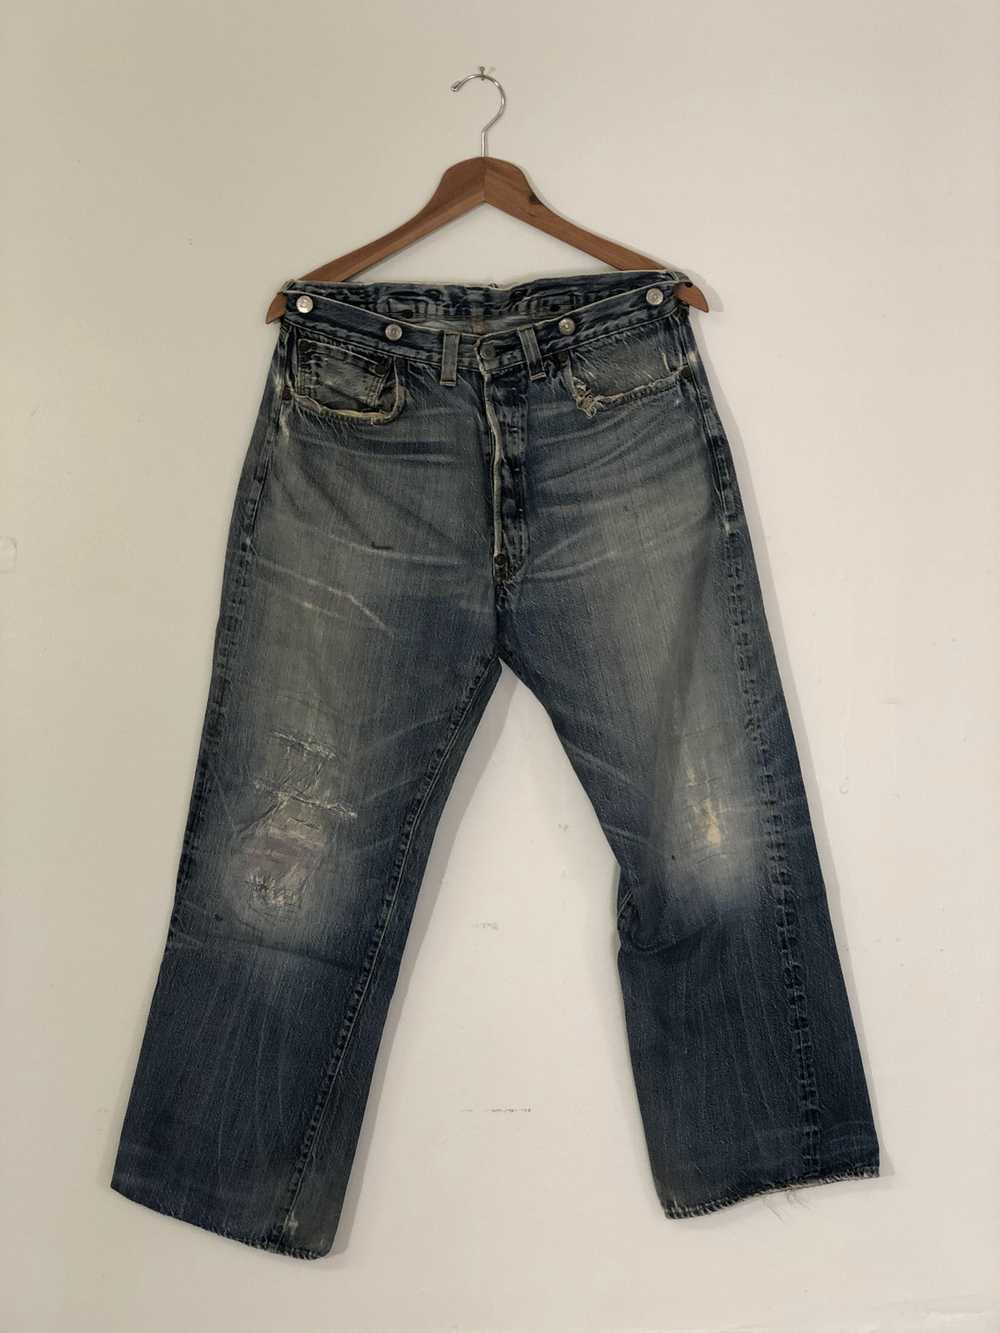 Vintage Levi's 501 Jeans - Rust Brown High Waisted 90s Grunge Tapered Leg